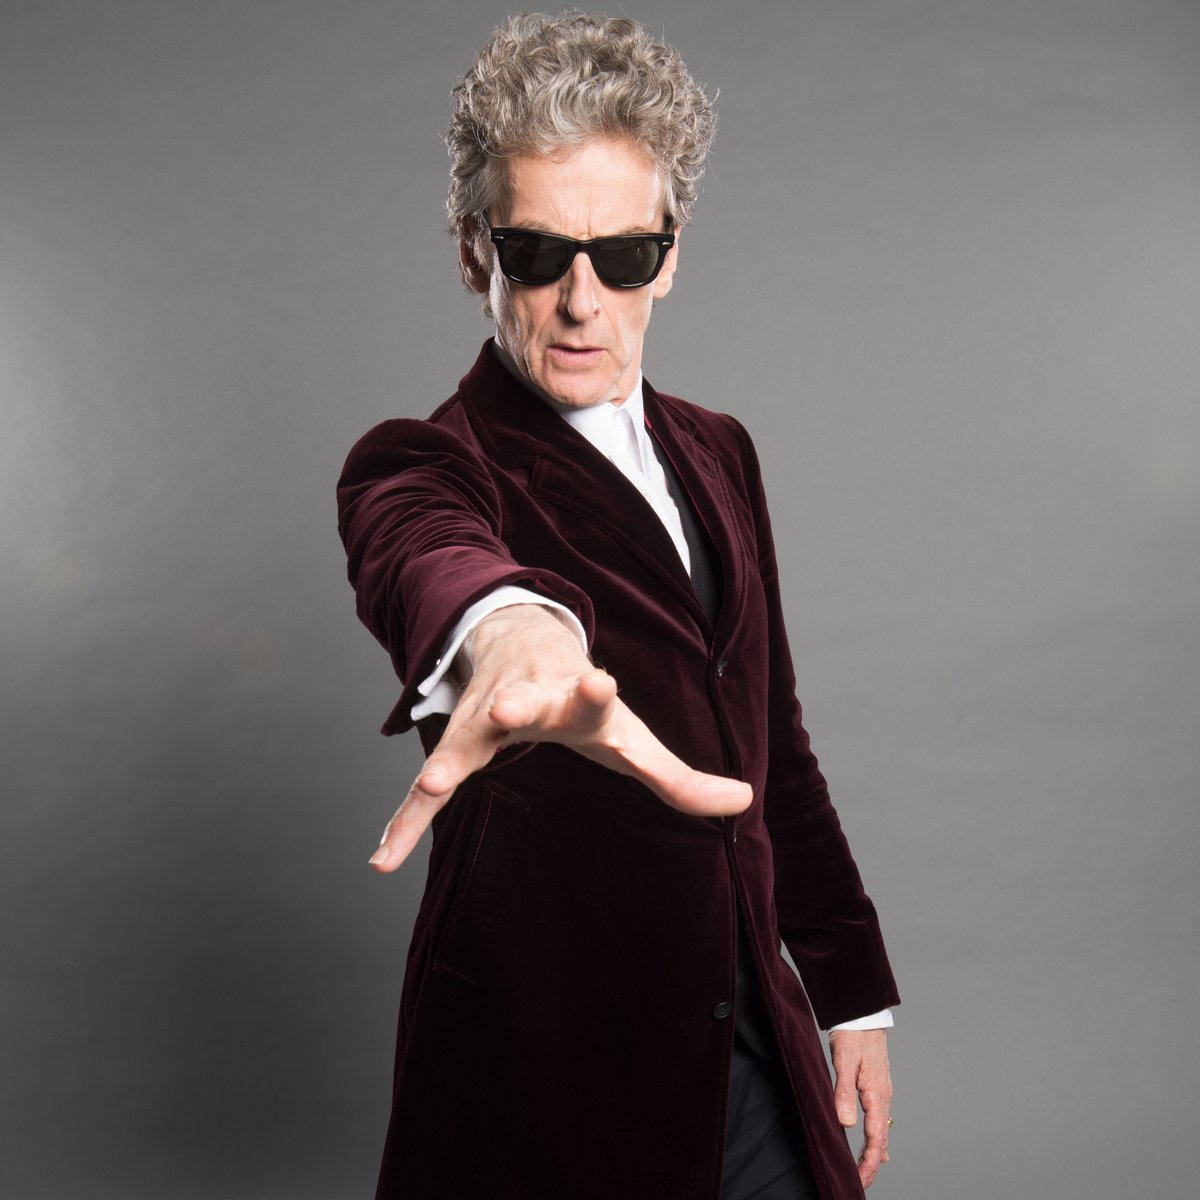 Thinking about last week when I said how the #TwelfthDoctor would be needing aid 👨‍🦯 while blind and #MrMicawber refusing him. Imagine if he was blind, too? In the 1800's, that'd be awful for him and his family! #PeterCapaldi @copperfieldfilm #MicawberMonday #DoctorWho #Extremis